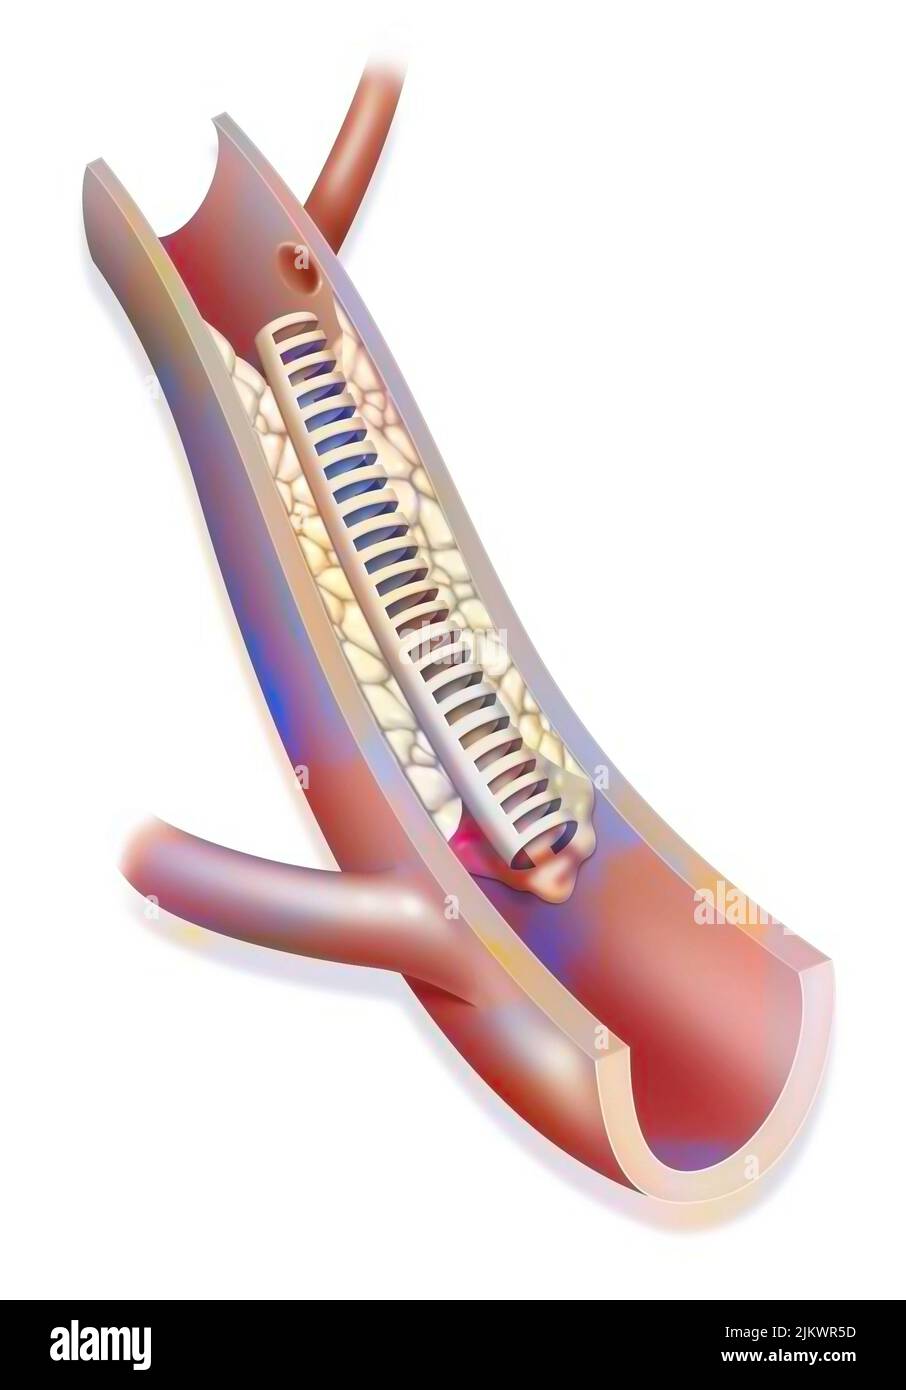 Coronary angioplasty by stent placement, step 3: the catheter is removed. Stock Photo